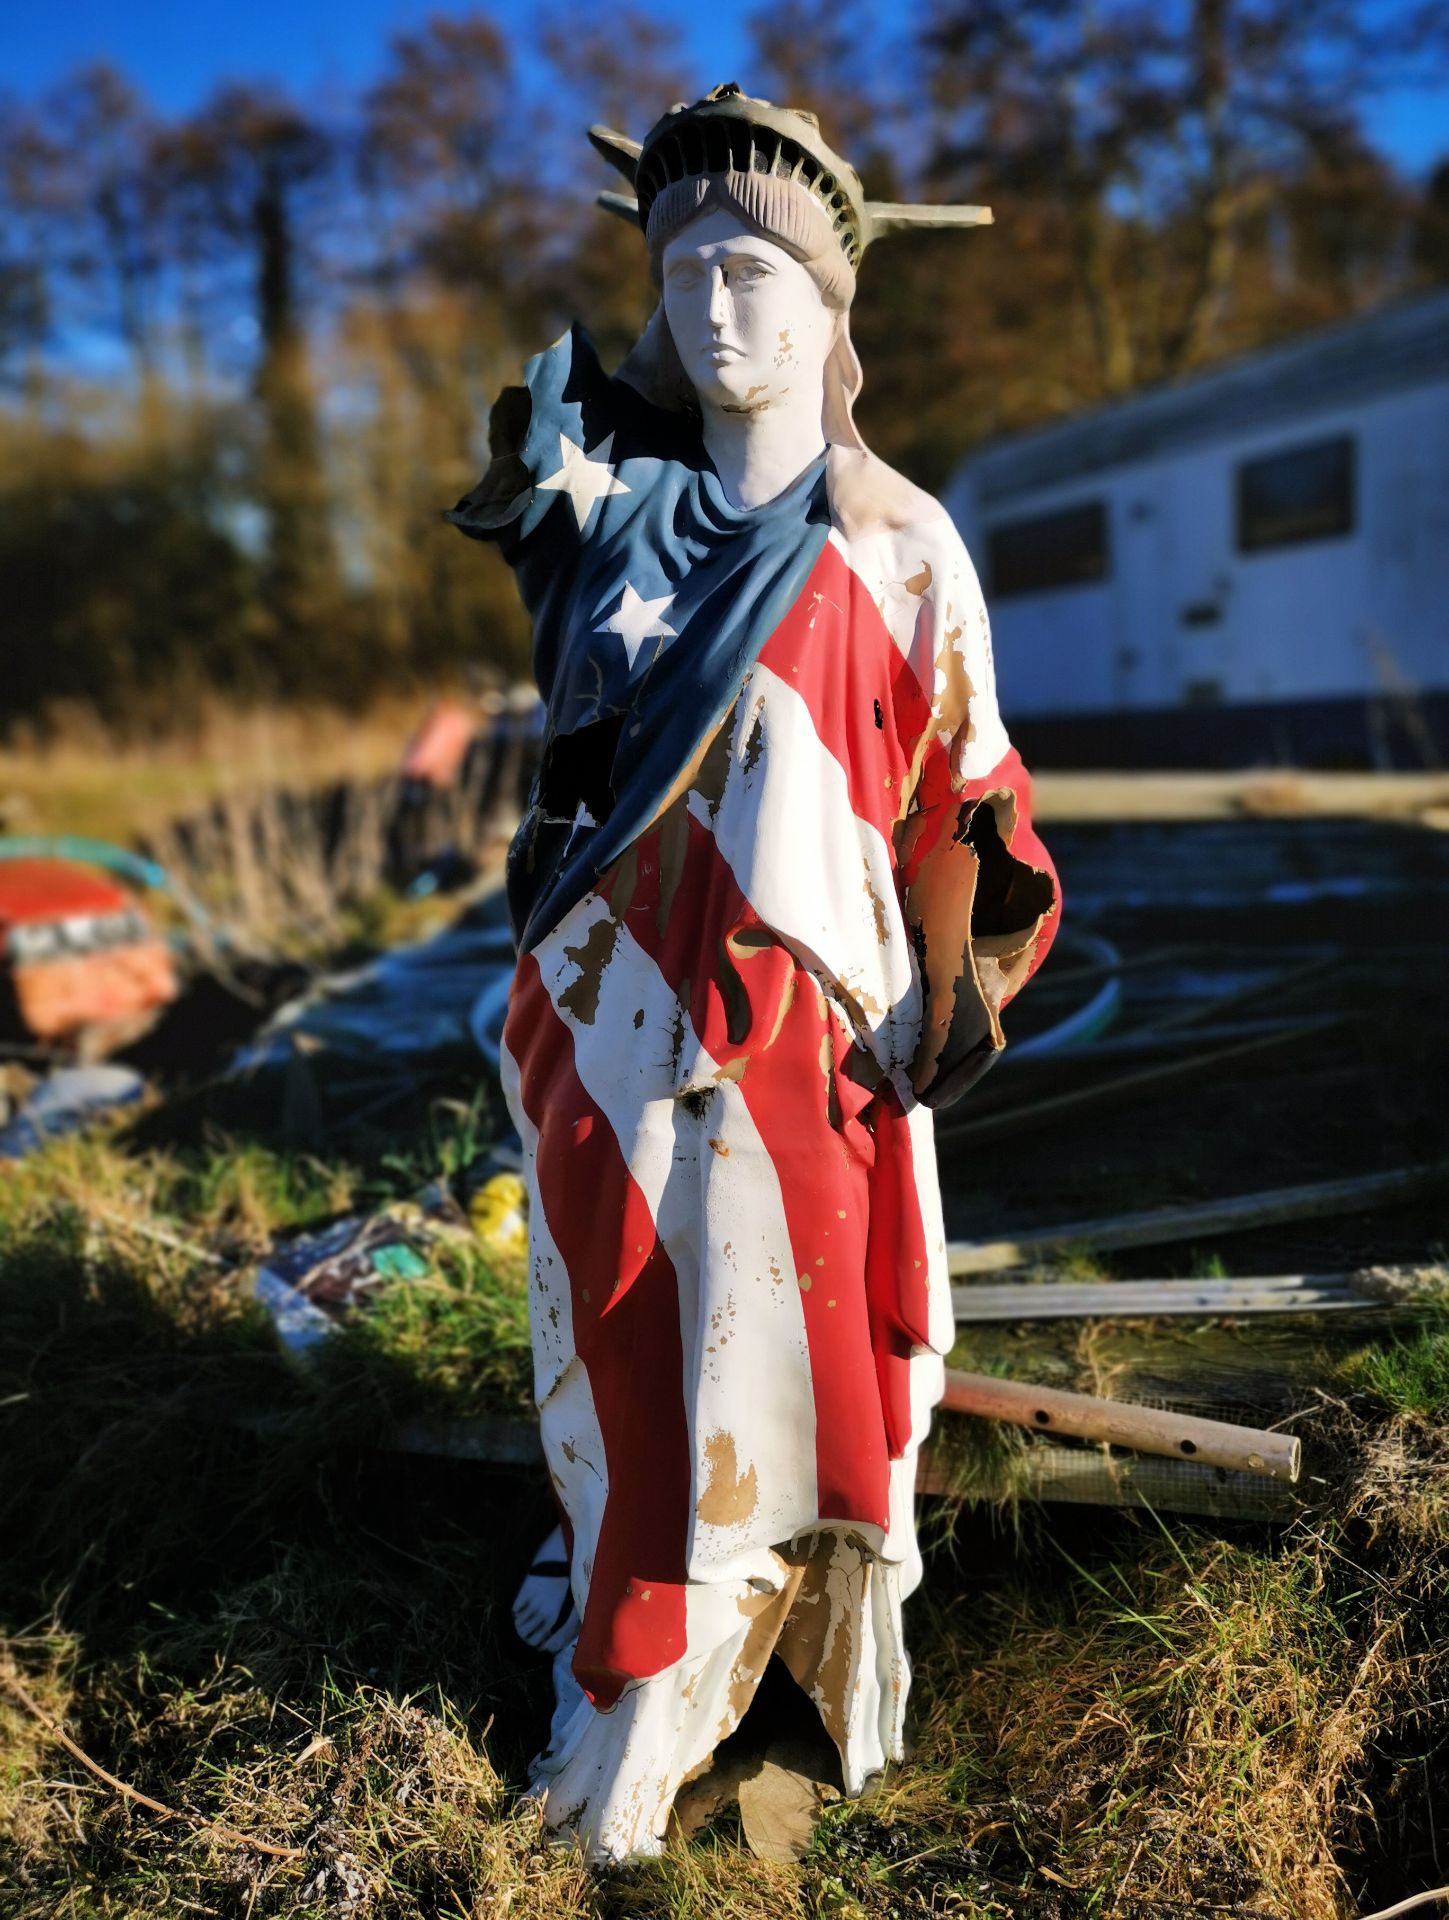 1 x 1.9m Tall Limited Edition Resin Statue of Liberty made by AAA (Damaged) - Dimensions: 1900 x 600